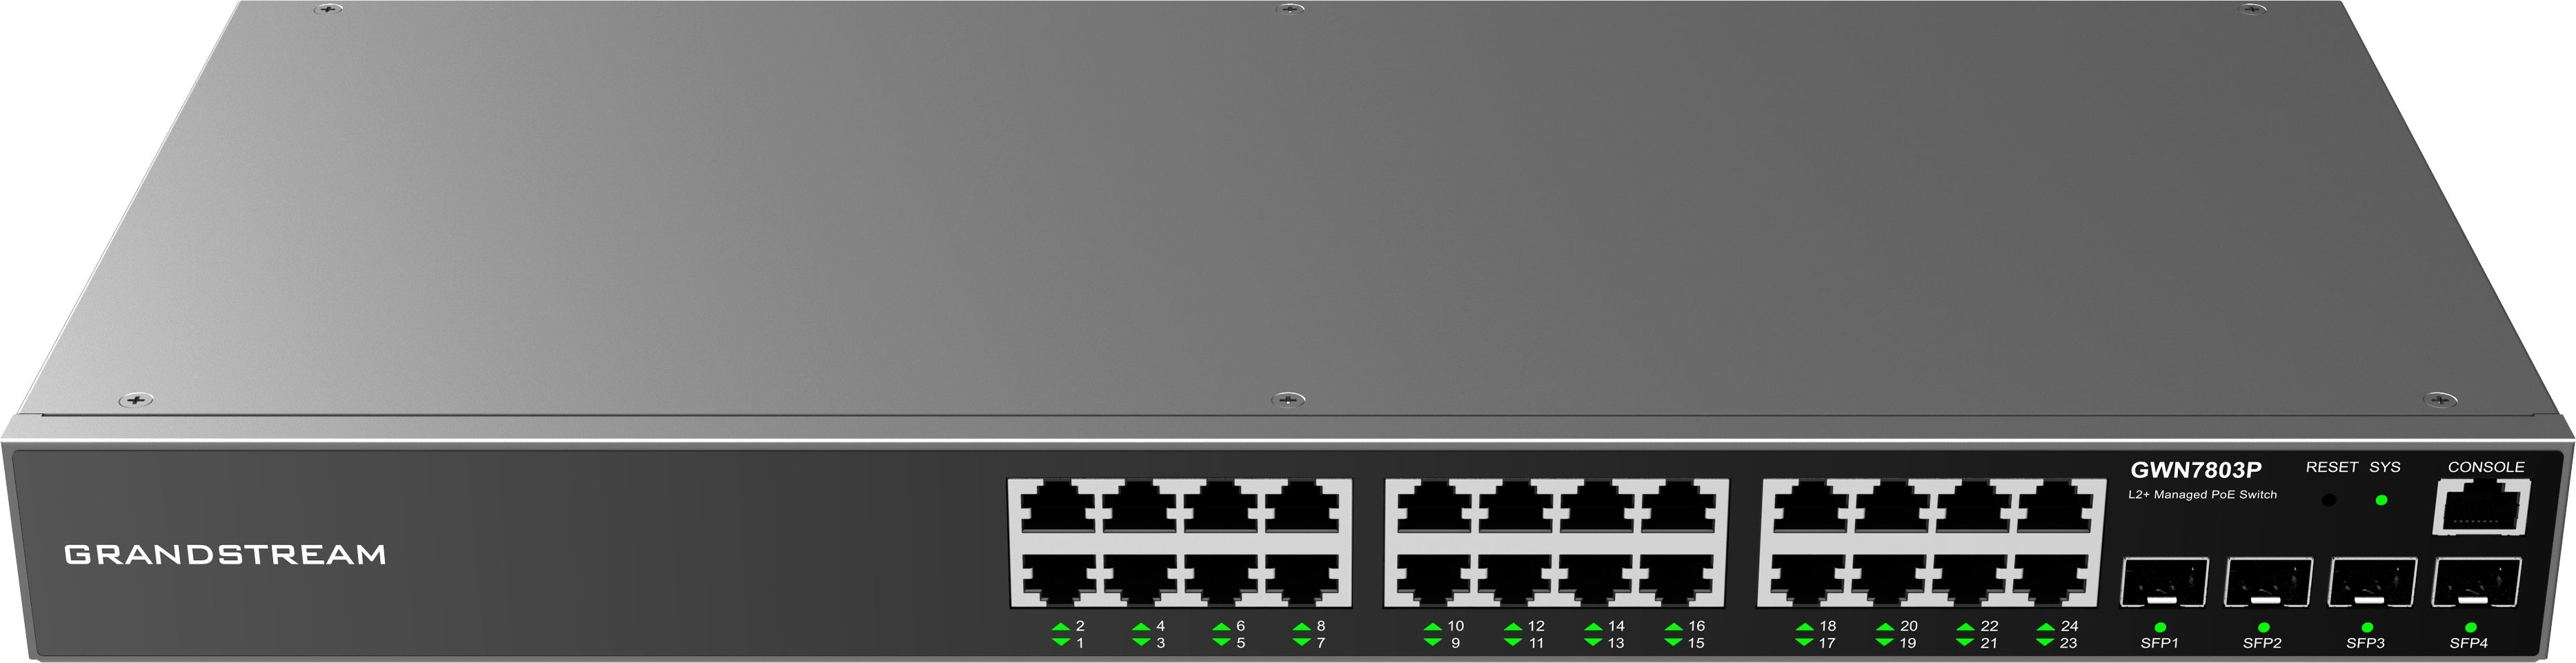 Grandstream GWN7803 Enterprise Layer 2+ Managed Network Switch (Networking Equipment Switches Gigabit Switches) photo